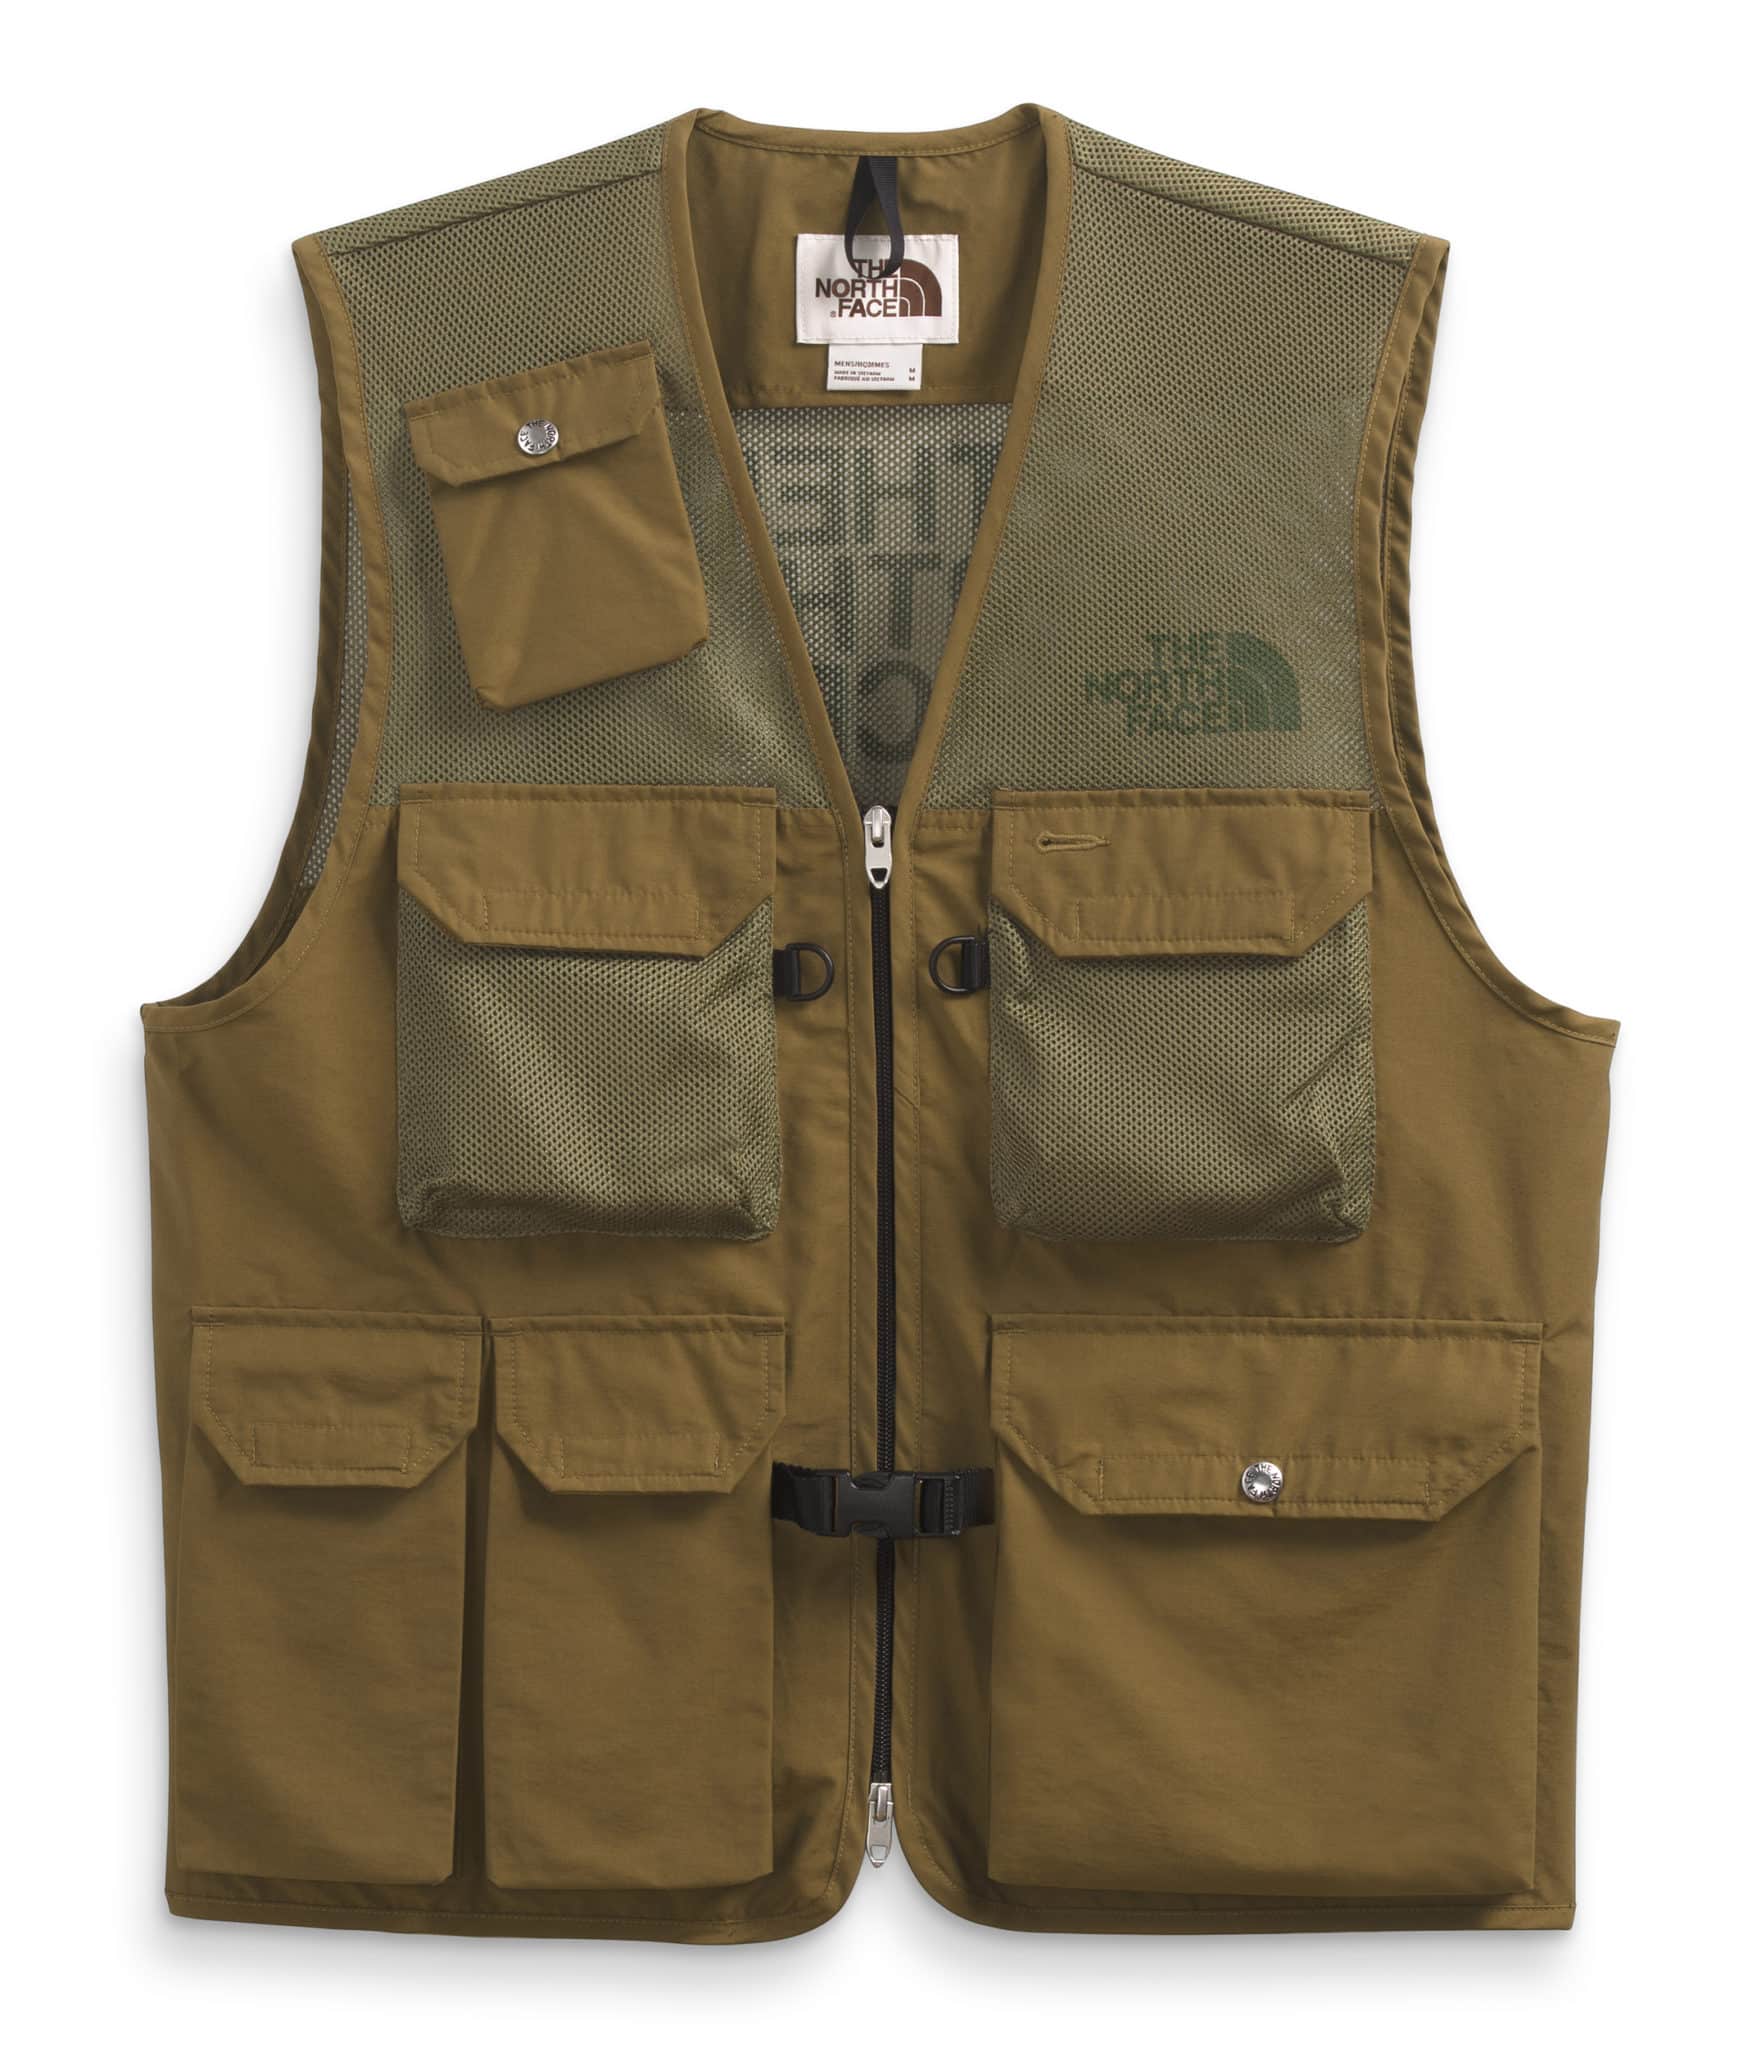 INSERT Father's Day GiftMens M66 Utility Field Vest in Military Olive